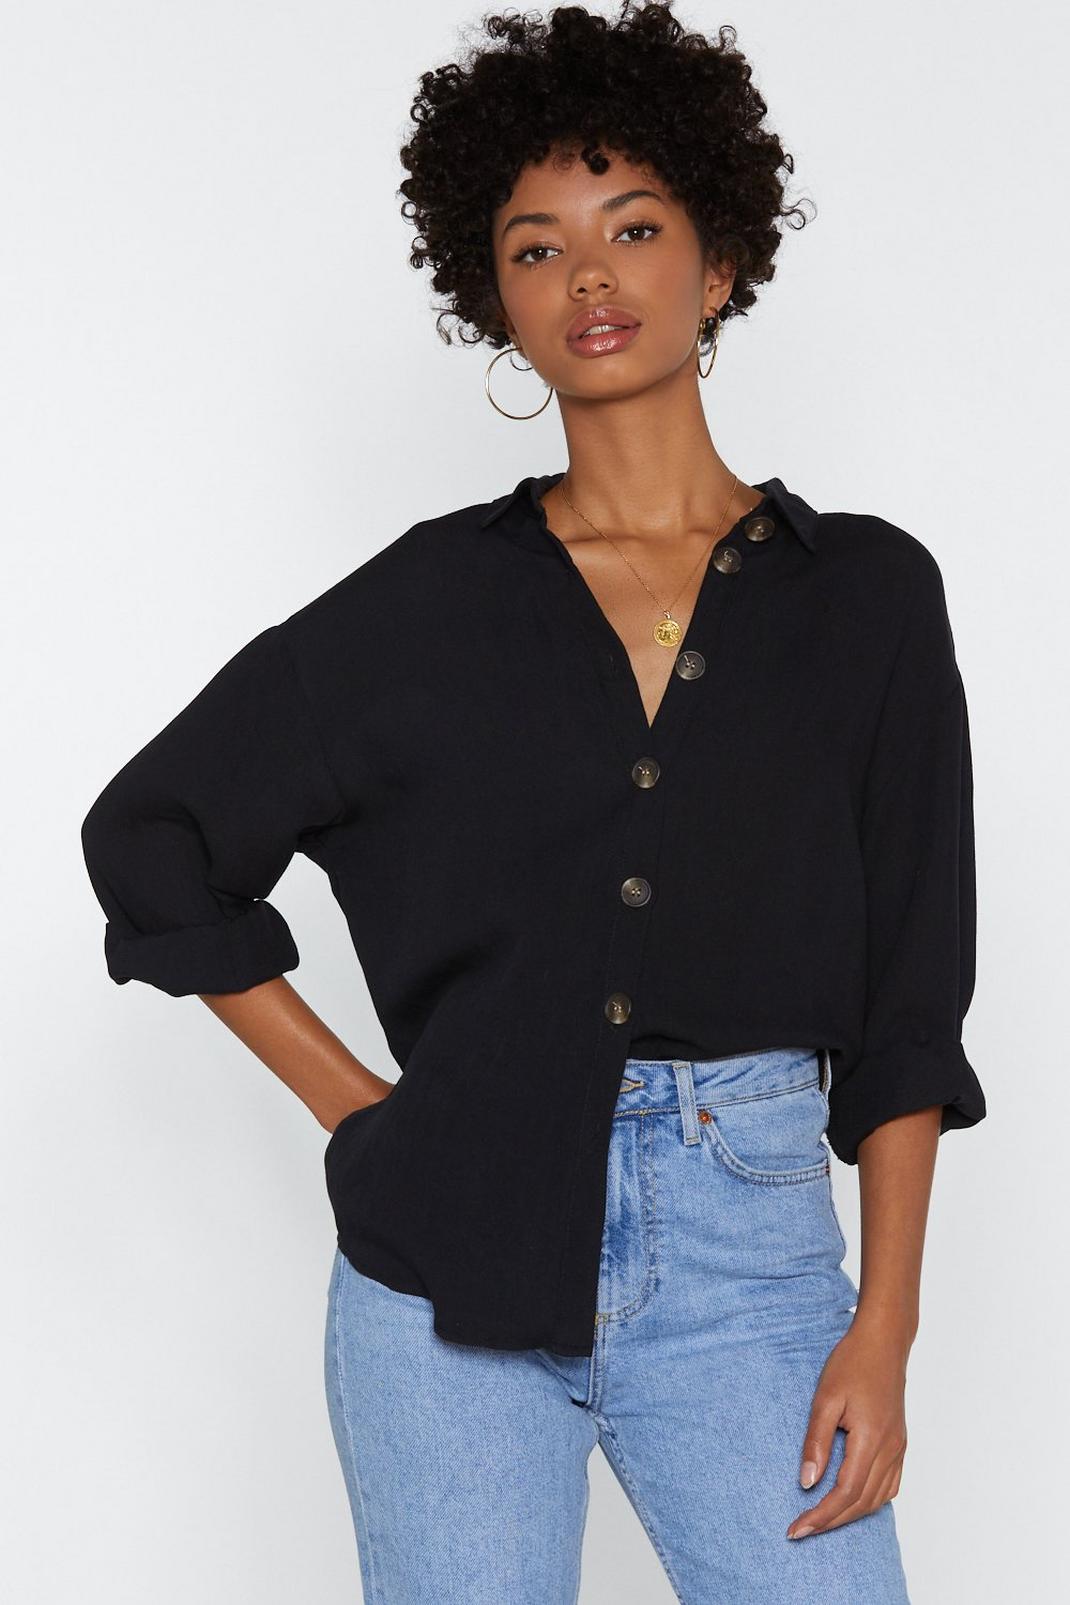 Relax Babe Button Shirt | Nasty Gal